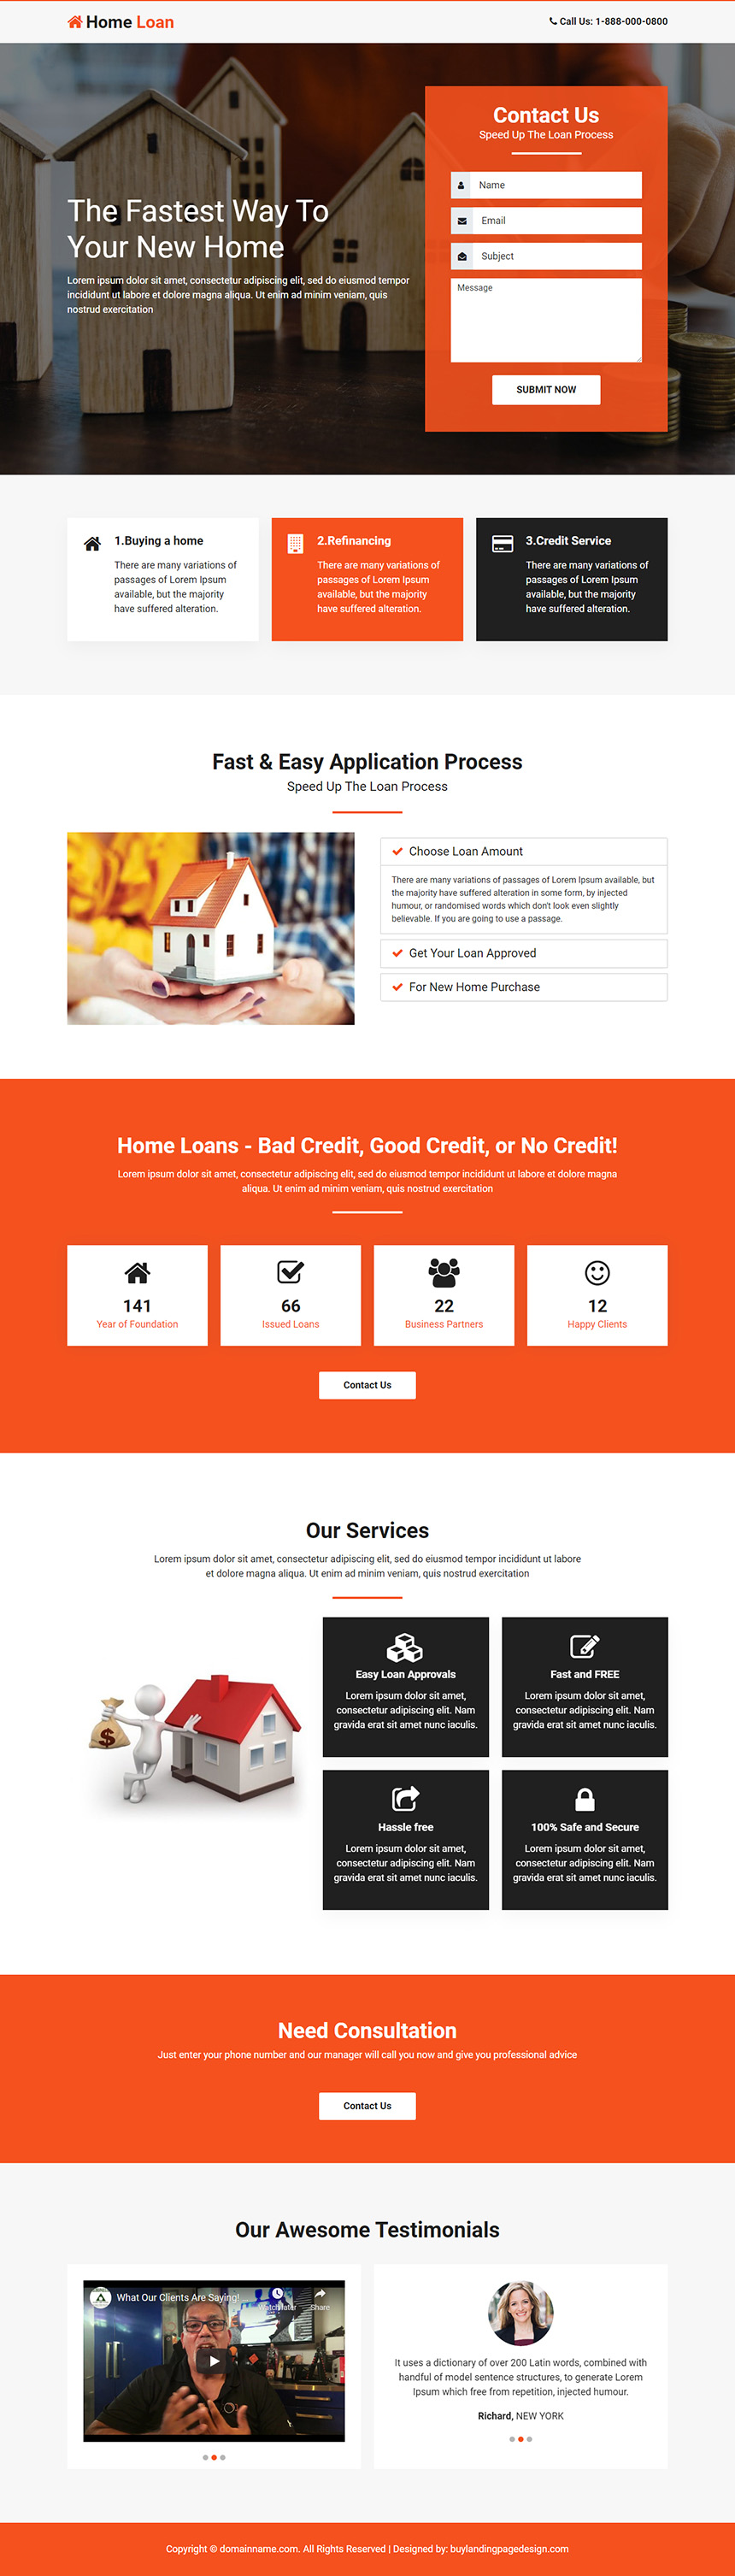 fast and easy home loan landing page design